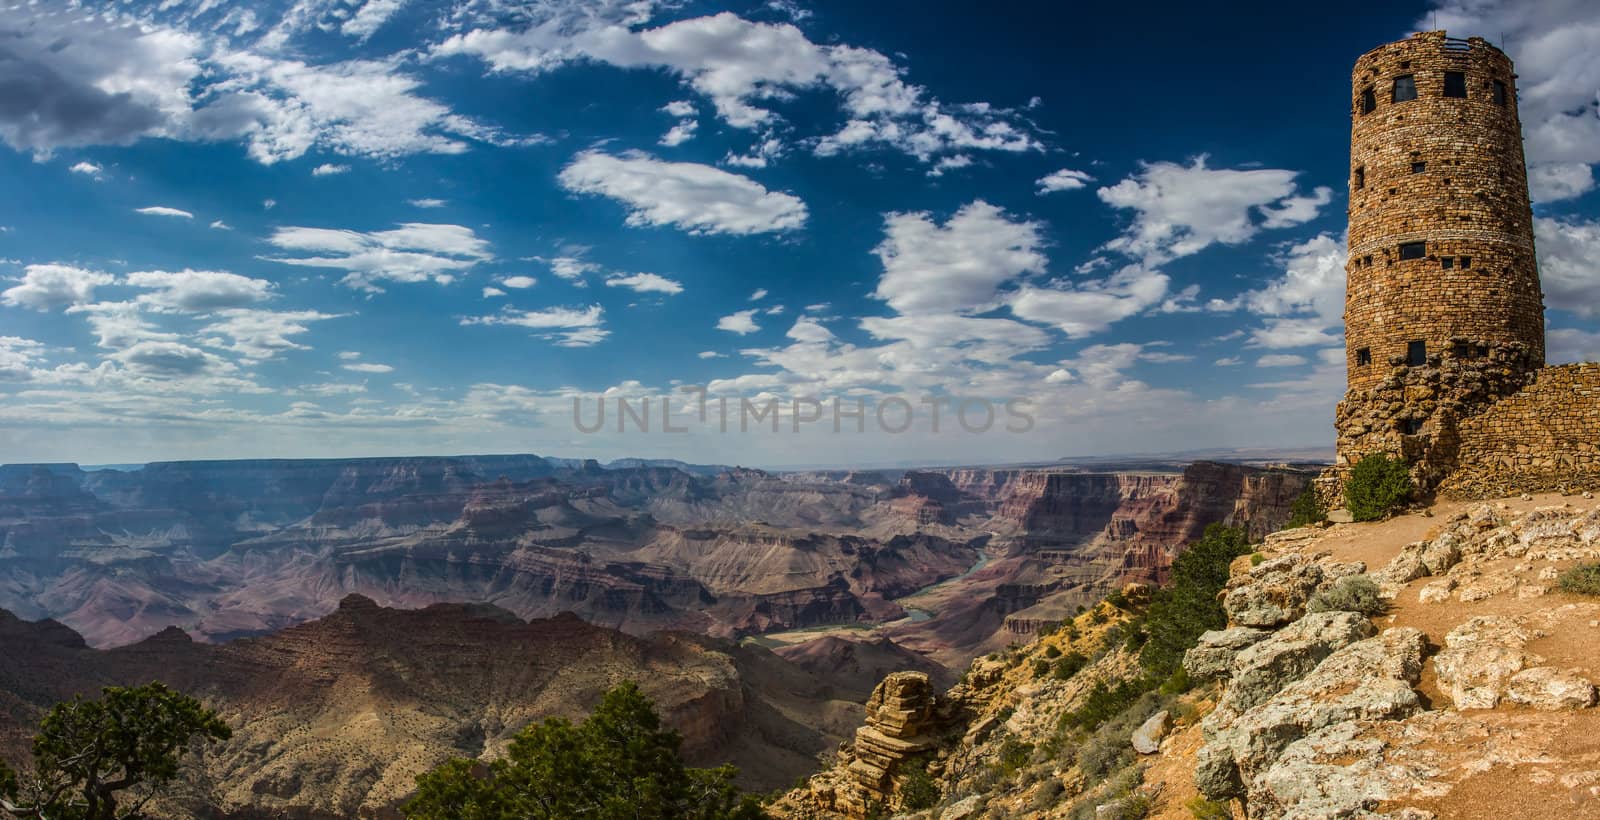 Panorama of the grand canyon with a blue sky and white clouds and the Desert View watchtower to the right of the image